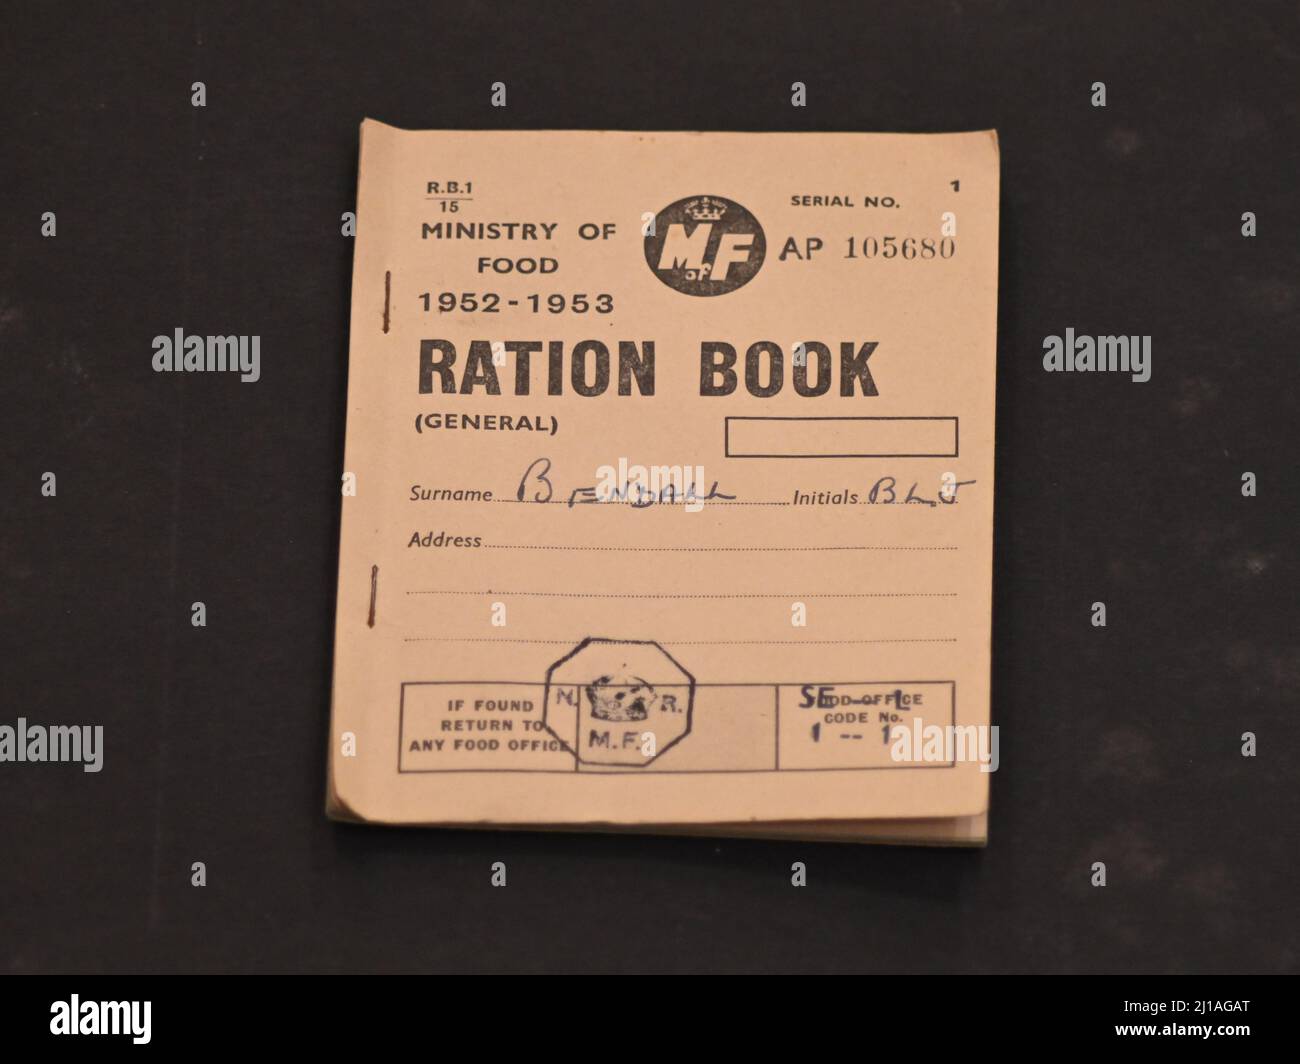 An original Ration Book issued by the Ministry of Food from 1952 to 1953 Stock Photo